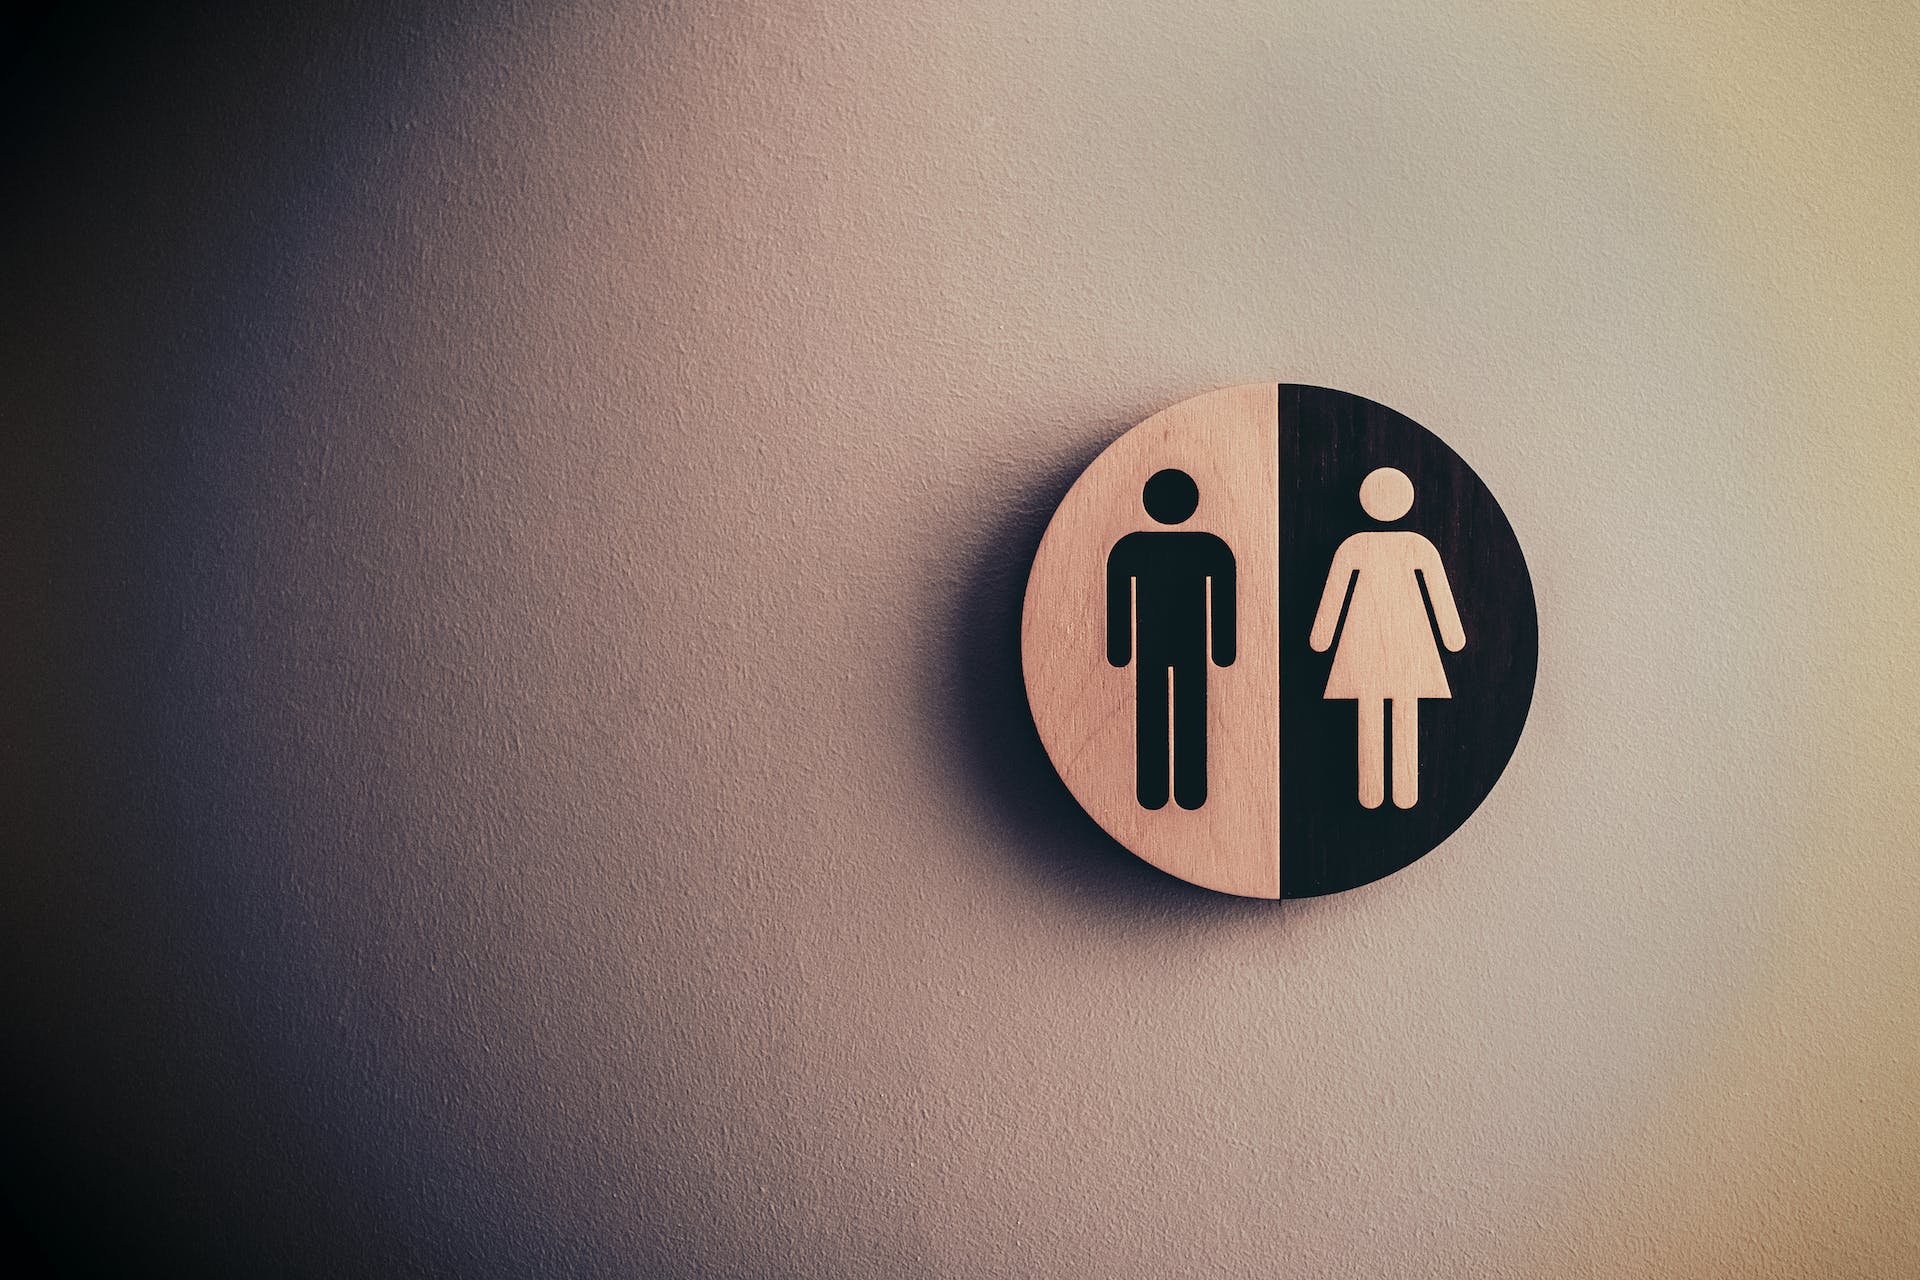 A toilet sign on a wall | Source: Pexels